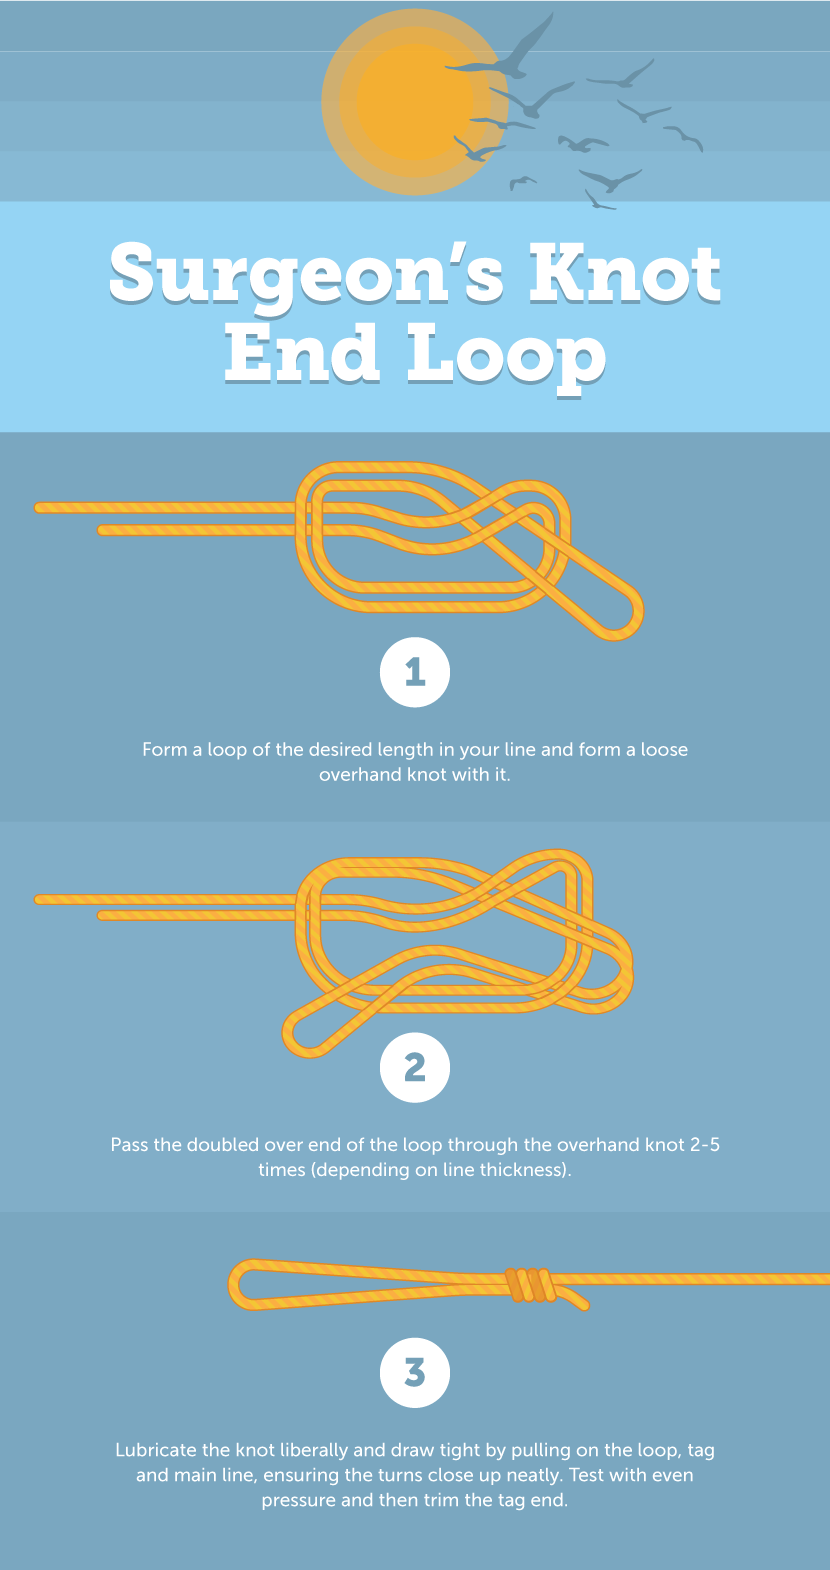 How to properly tie a fishing line knot : r/Survival